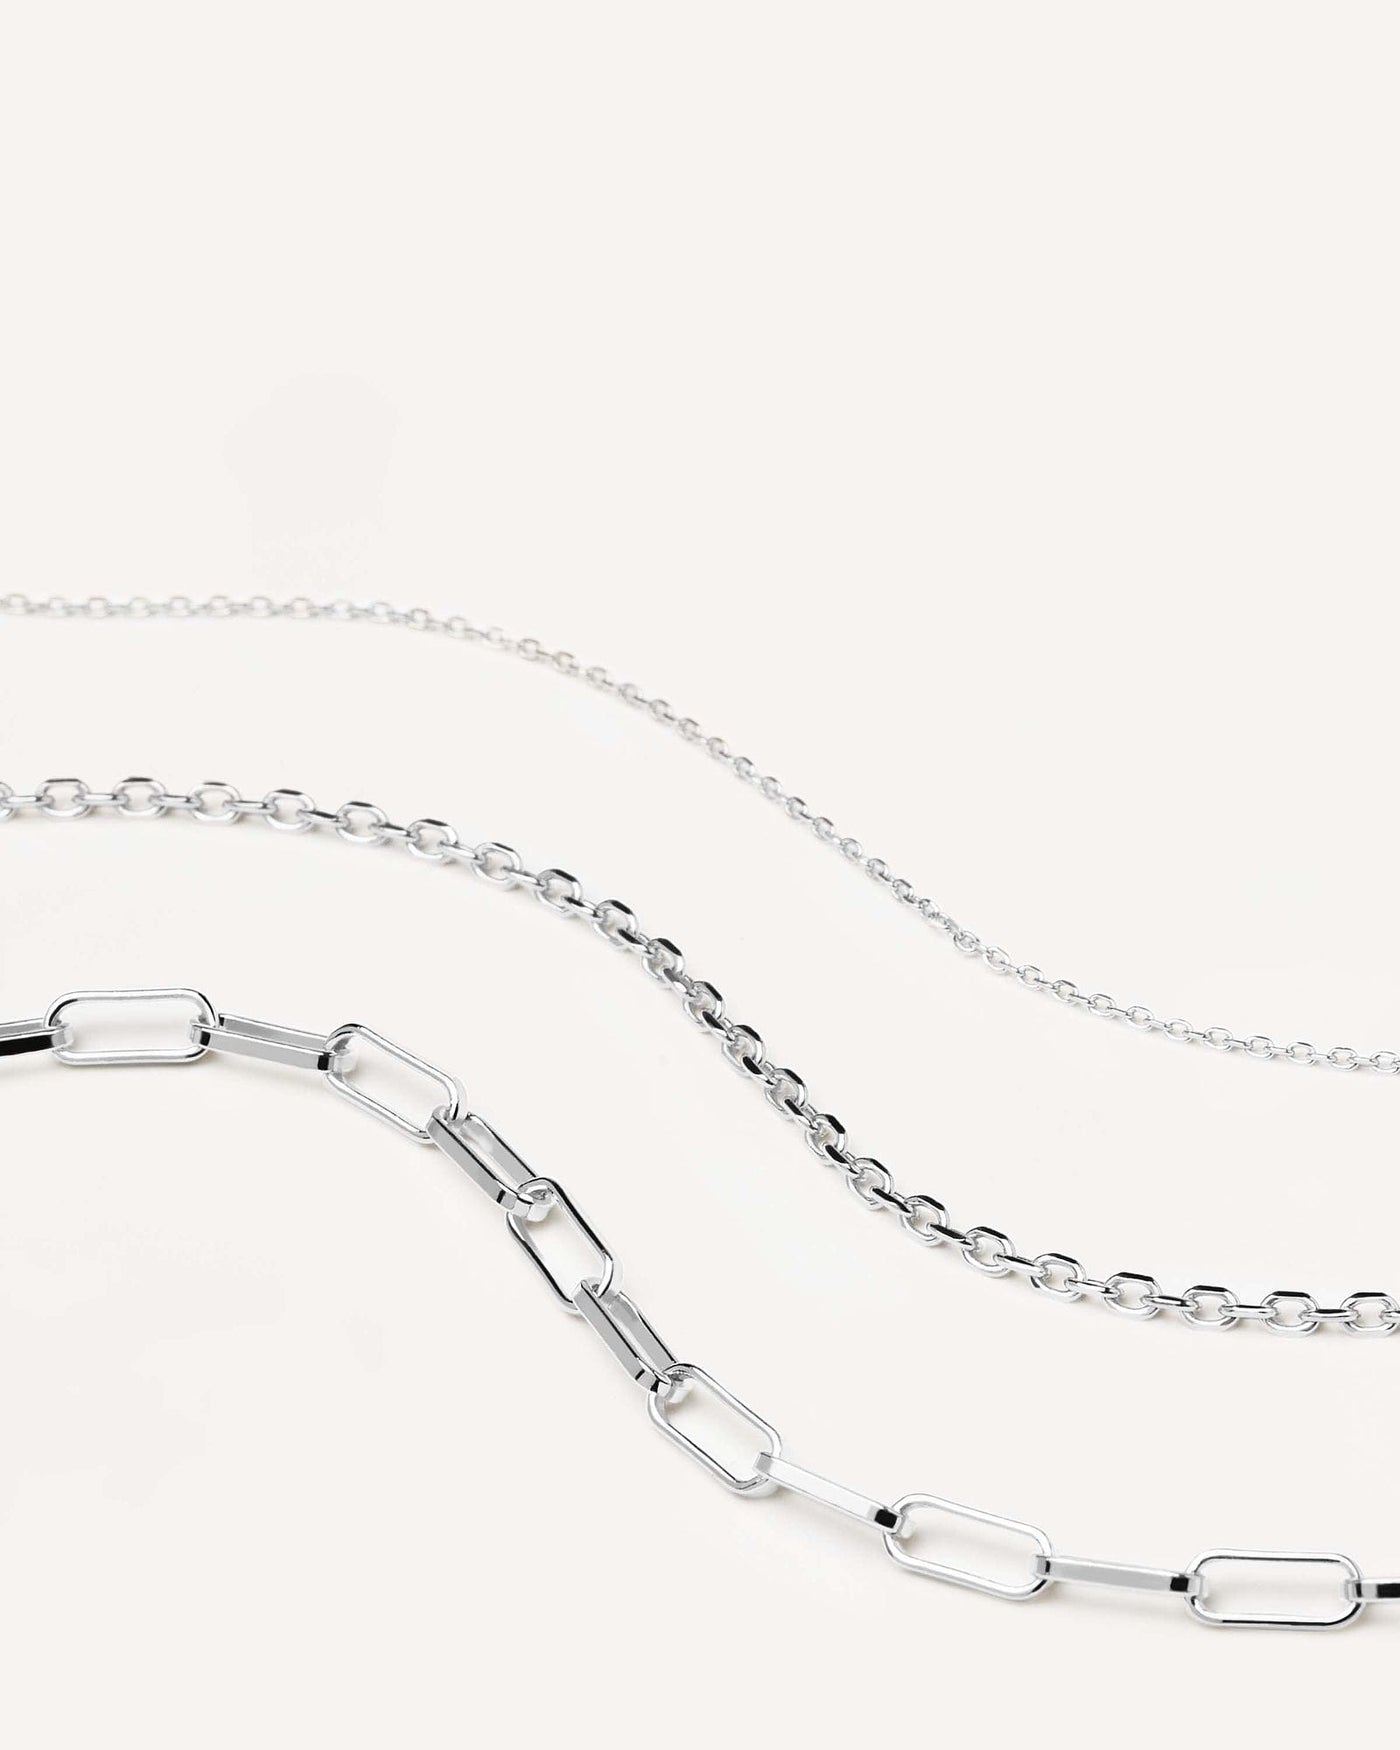 2024 Selection | Essential Silver Necklaces Set. Set of stackable 925 sterling silver chain necklaces in three link sizes and shapes. Get the latest arrival from PDPAOLA. Place your order safely and get this Best Seller. Free Shipping.